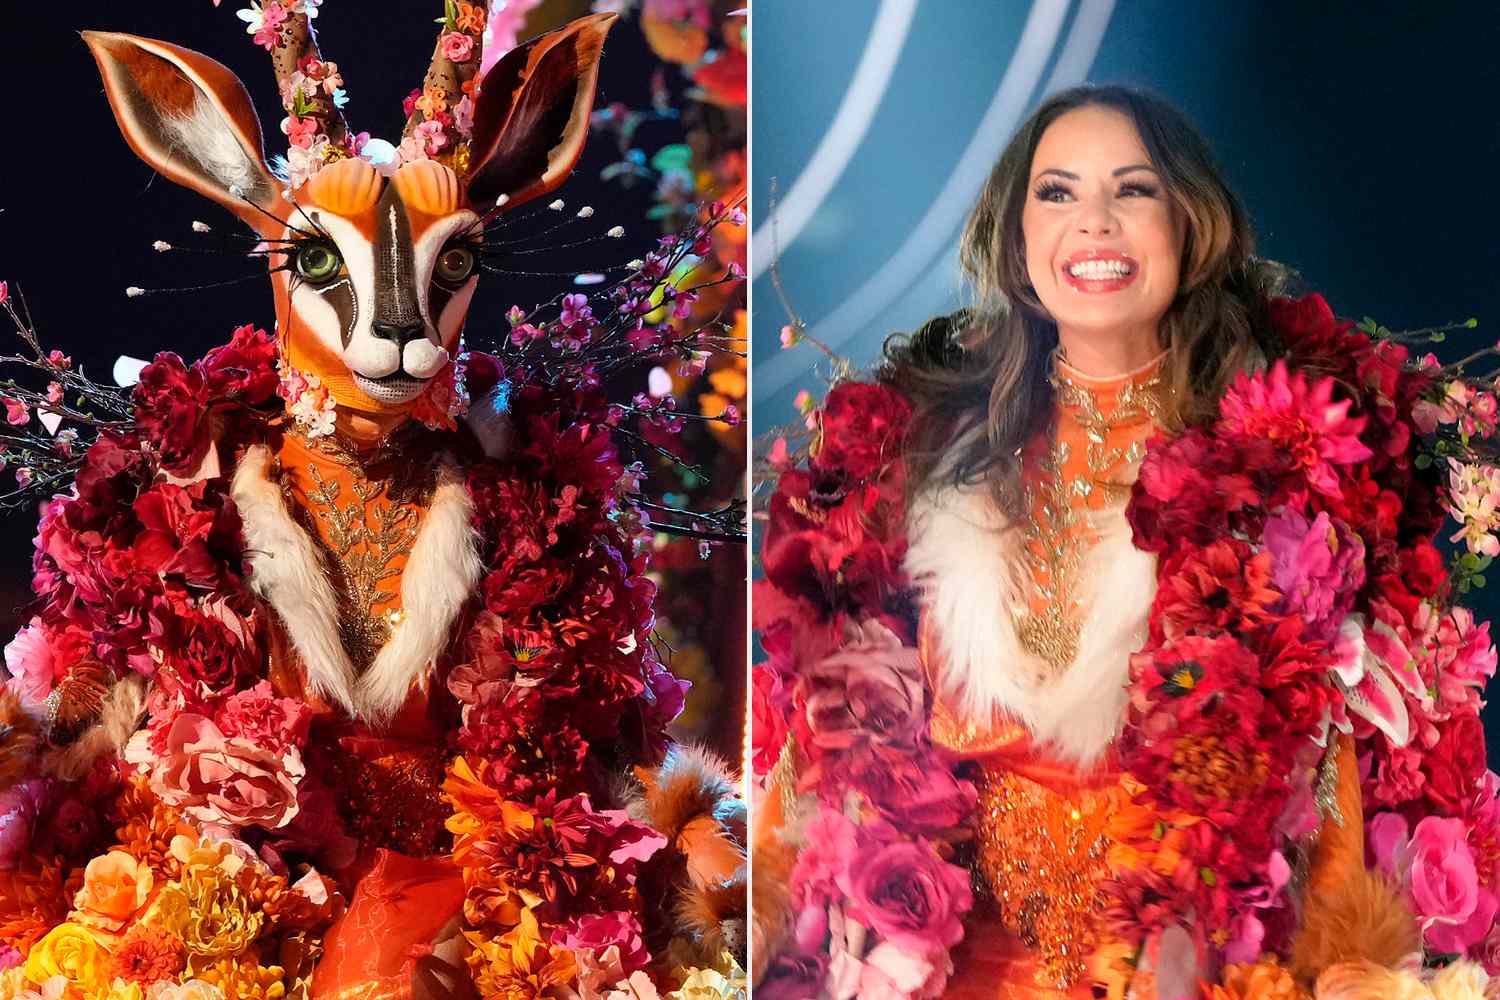 Gazelle in costume on 'The Masked Singer' // unmasked on show as Janel Parrish